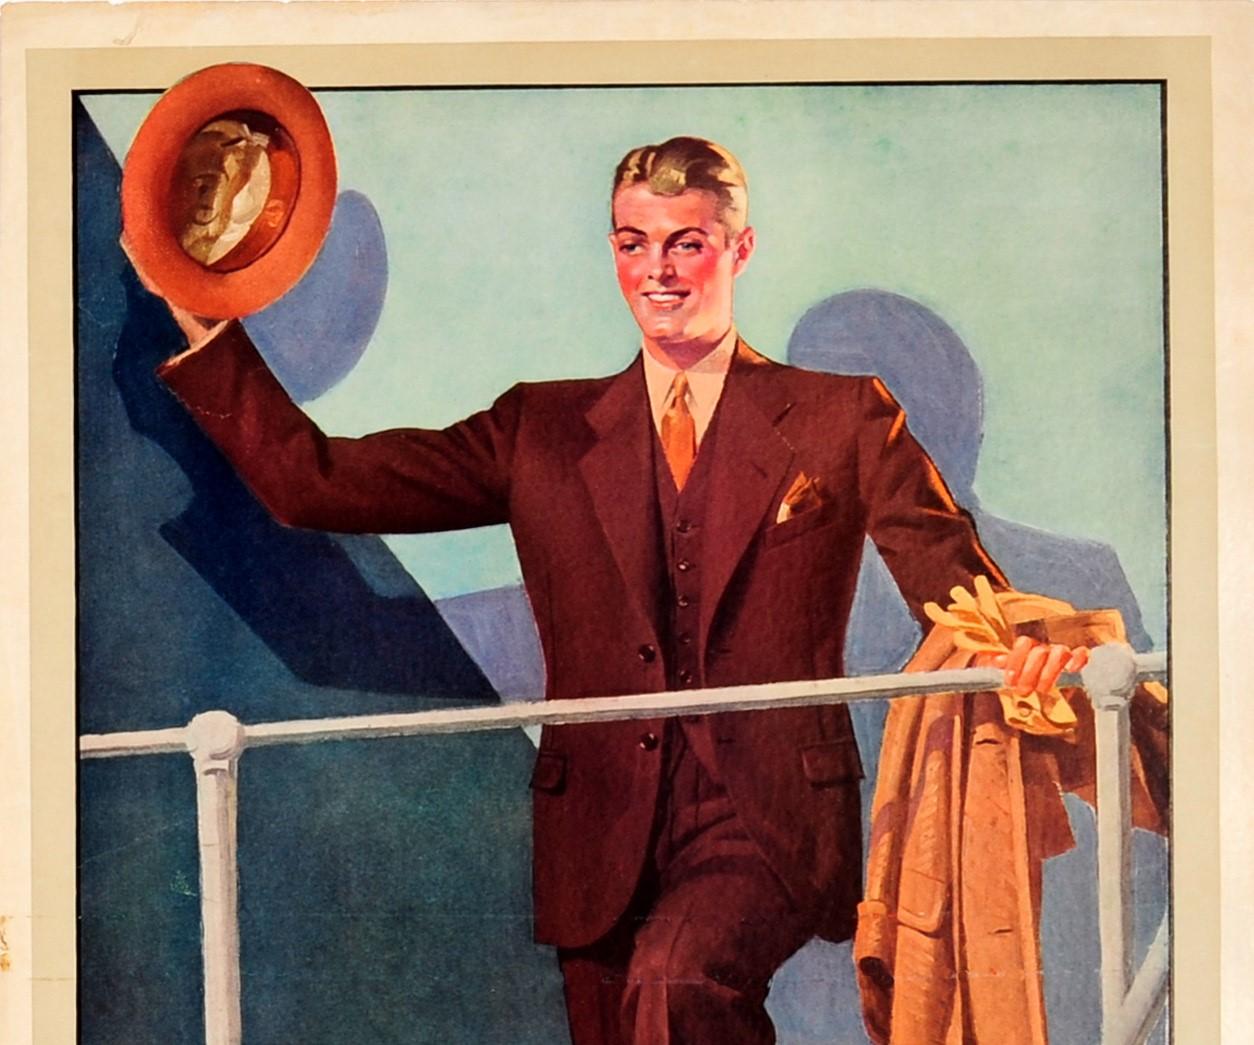 Original vintage men's fashion advertising poster for Schloss Bros. & Co. American department store located in Baltimore and New York specialising in men's suits. Great illustration featuring a smartly dressed young man wearing a brown suit with a